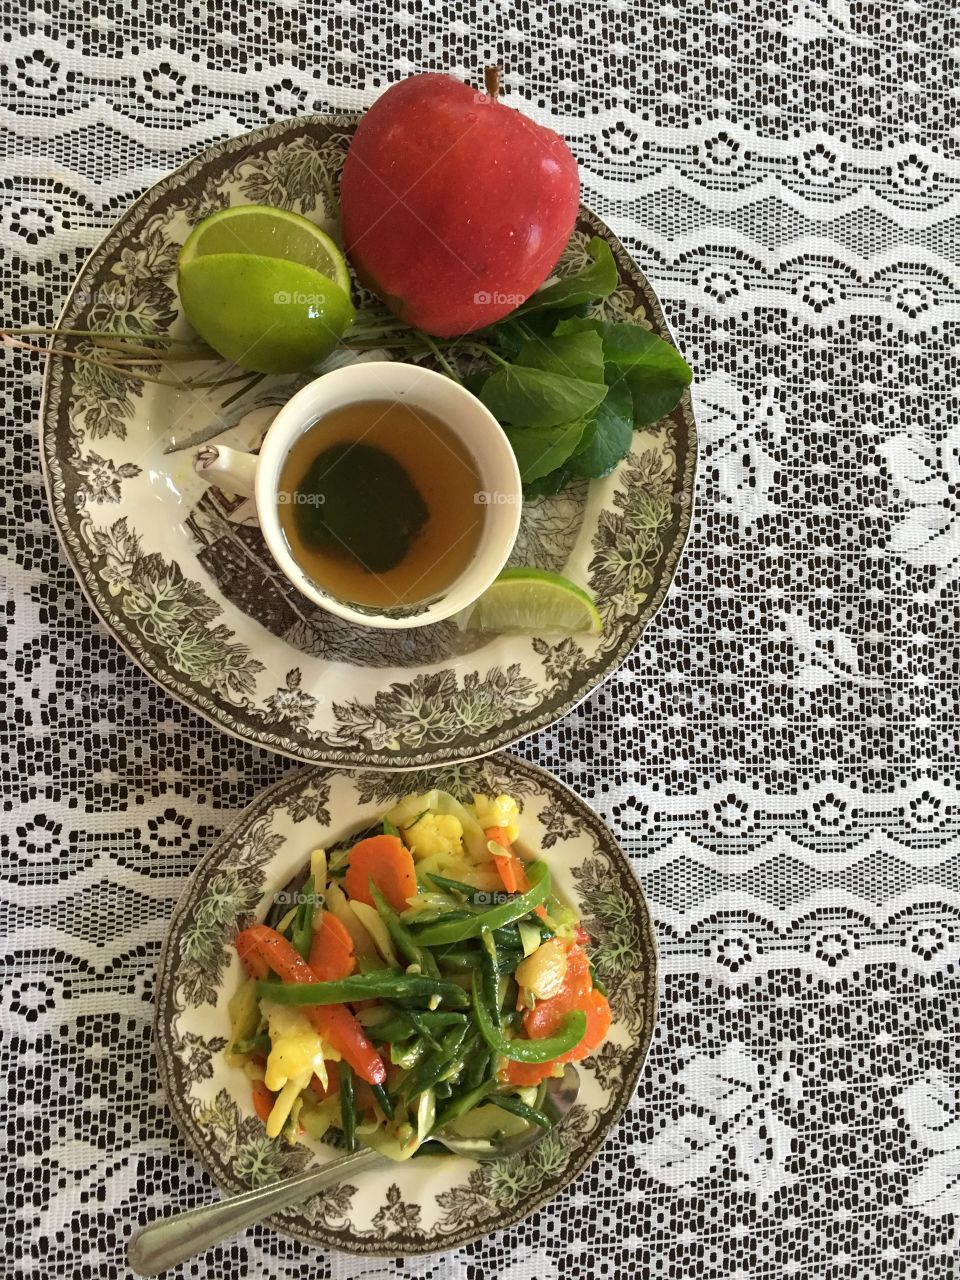 Vegetables and Tea